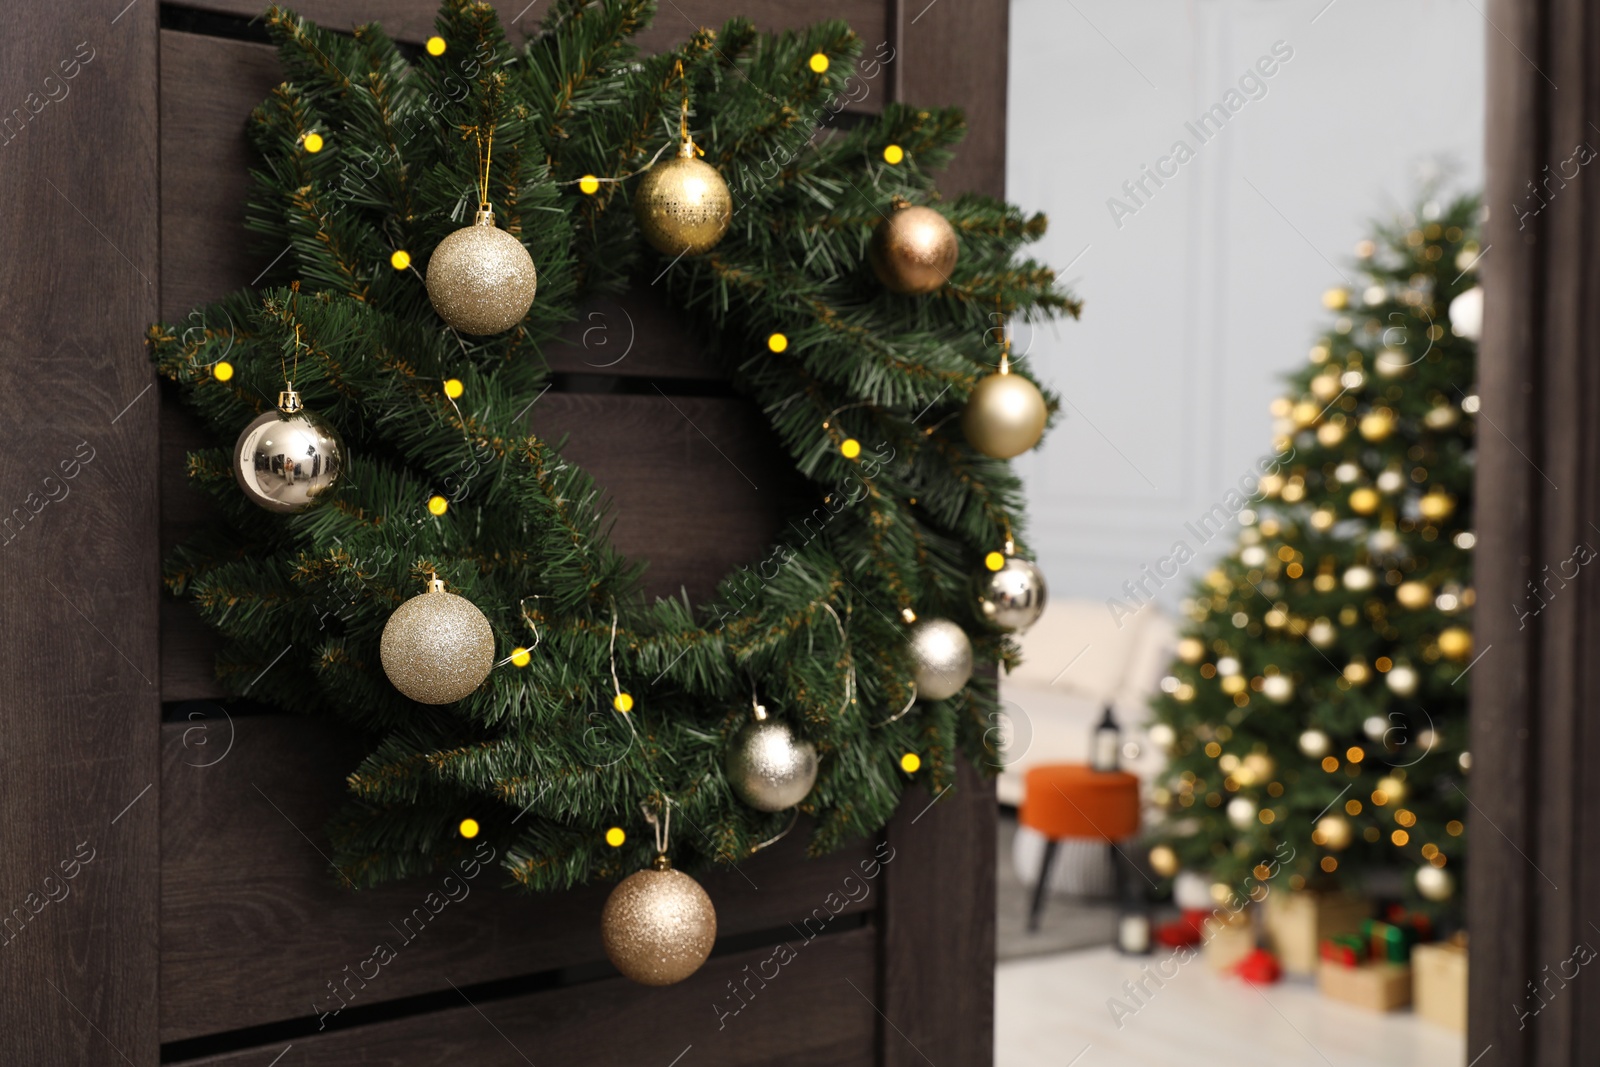 Photo of Christmas wreath with golden and silver baubles hanging on wooden door indoors